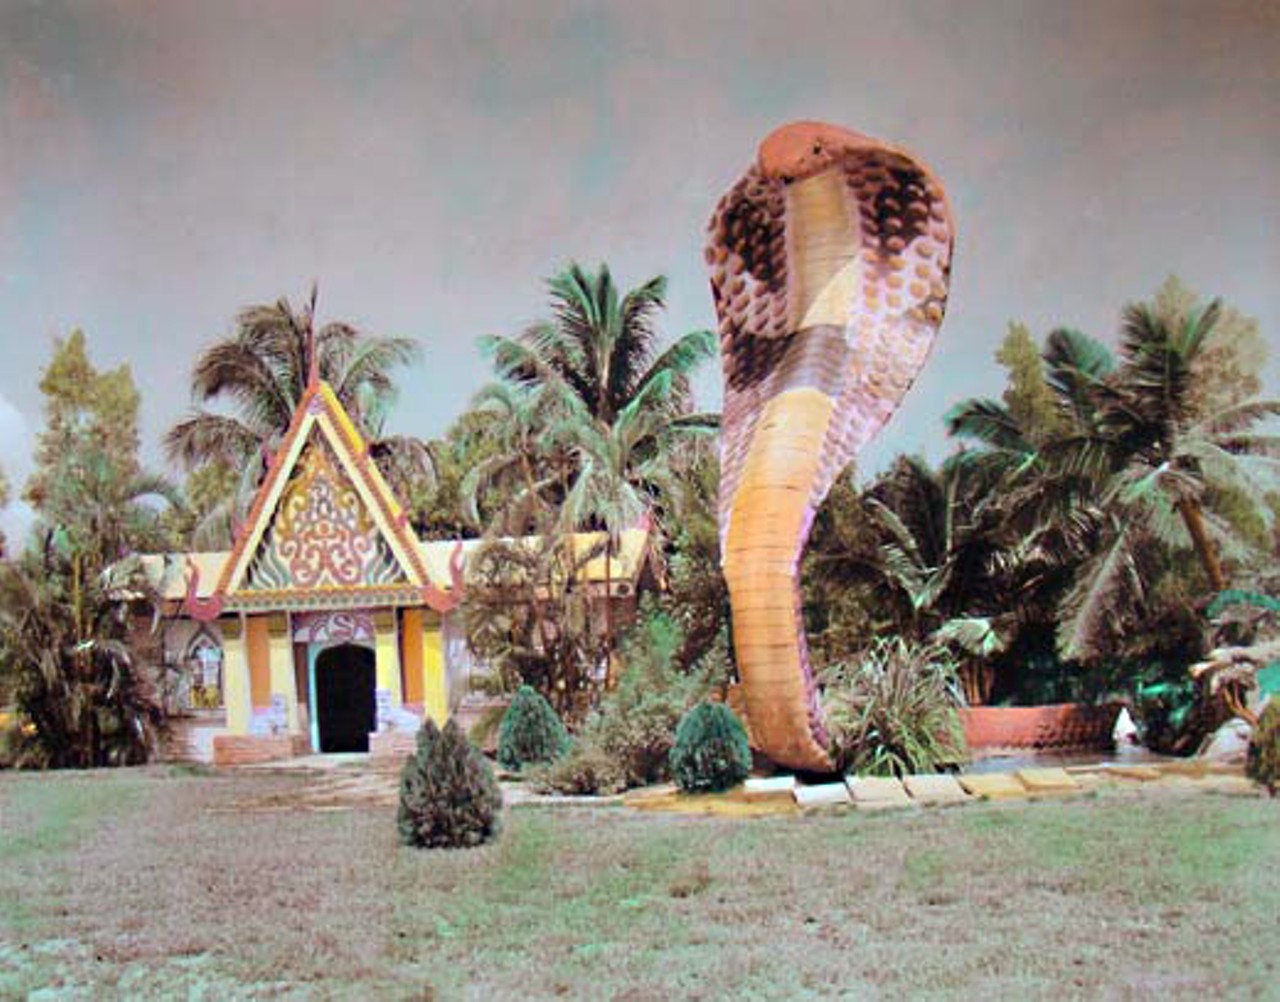 The Miami Serpentarium
The Miami Serpentarium was open from 1947 to 1985, and was the first-of-it's kind pioneering venom production laboratory in the world. Located along the South Dixie Highway, the Serpentarium featured green mambas, king cobras, palm vipers and plenty of other venomous snakes, on top of the 35-foot-high concrete and stucco cobra outside the building. Presiding over the snakes was Bill Hasst, snake handler and scientist who injected himself with a cocktail of snake venom every week to prove it could treat various ailments.